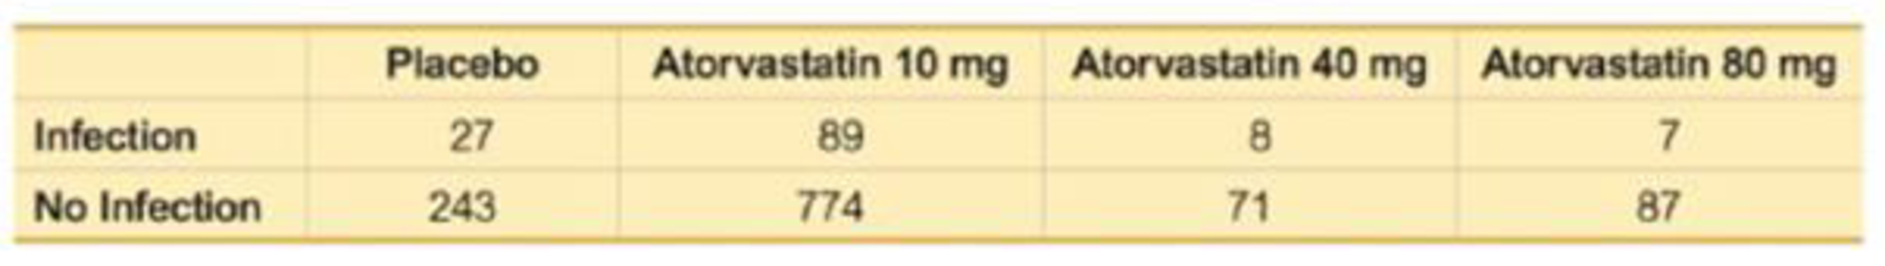 Chapter 11, Problem 4RE, Clinical Trial of Lipitor Lipitor is the trade name of the drug atorvastatin, which is used to 